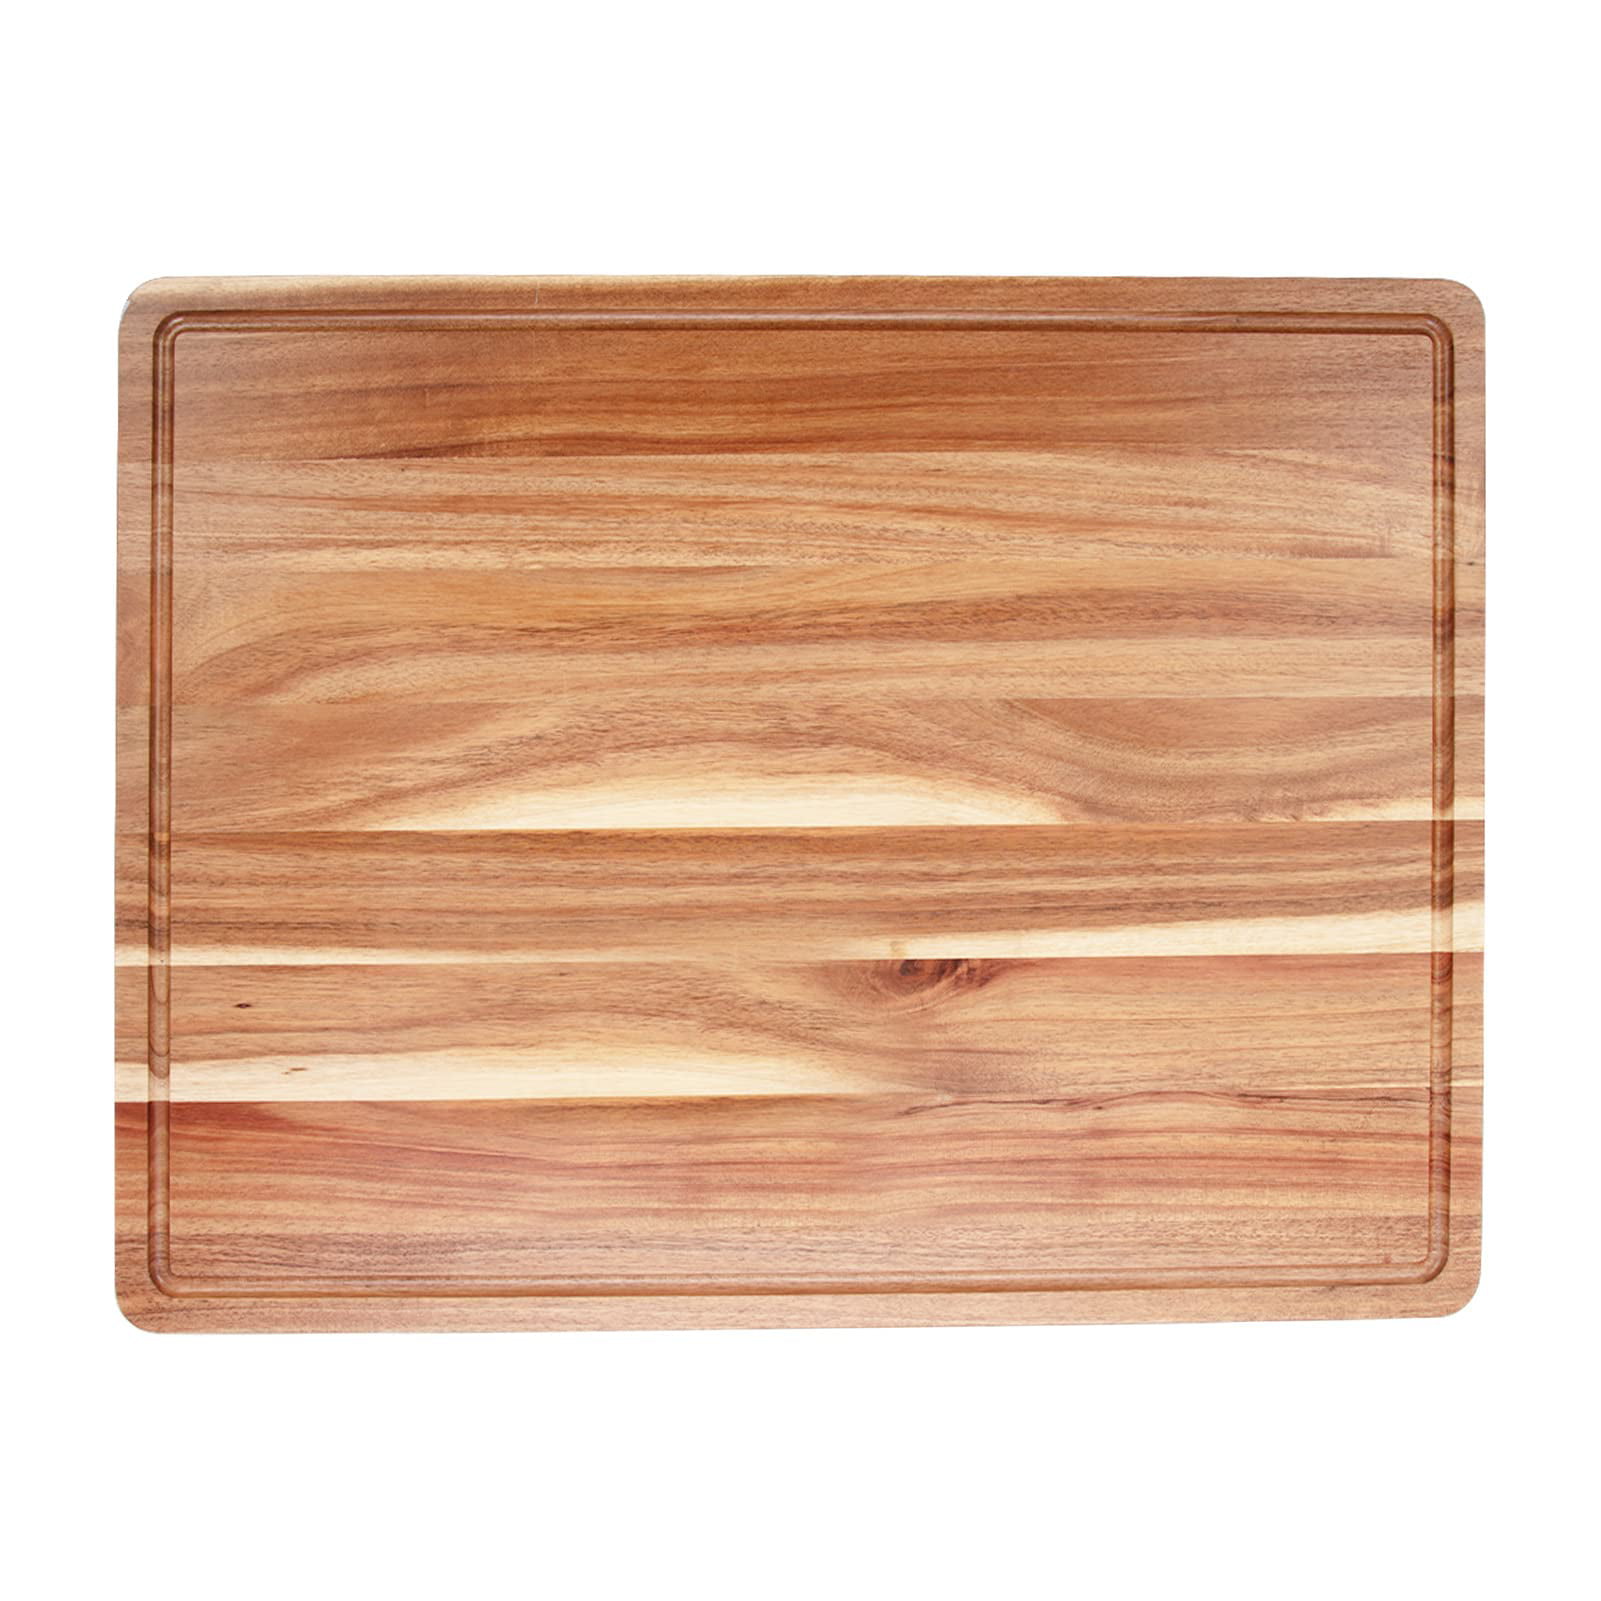 Large Wood Cutting Board with Premium Edge Grain Construction